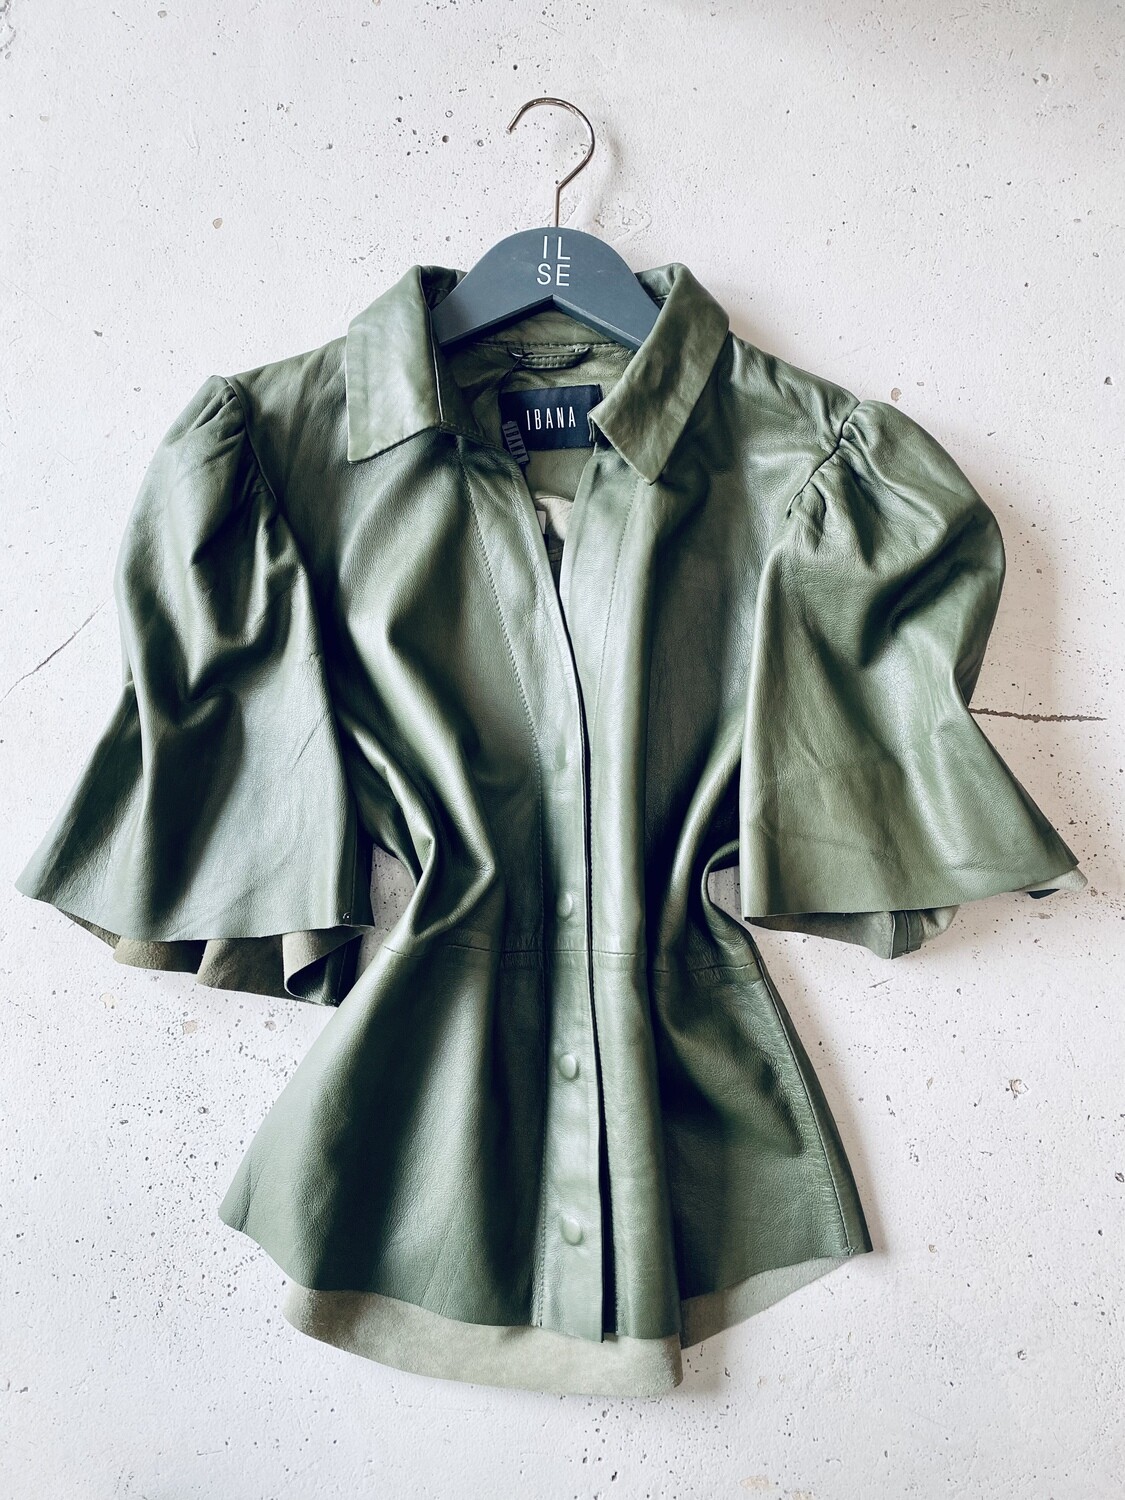 Ibana Tickle Top Olive Green Blouse 302230008